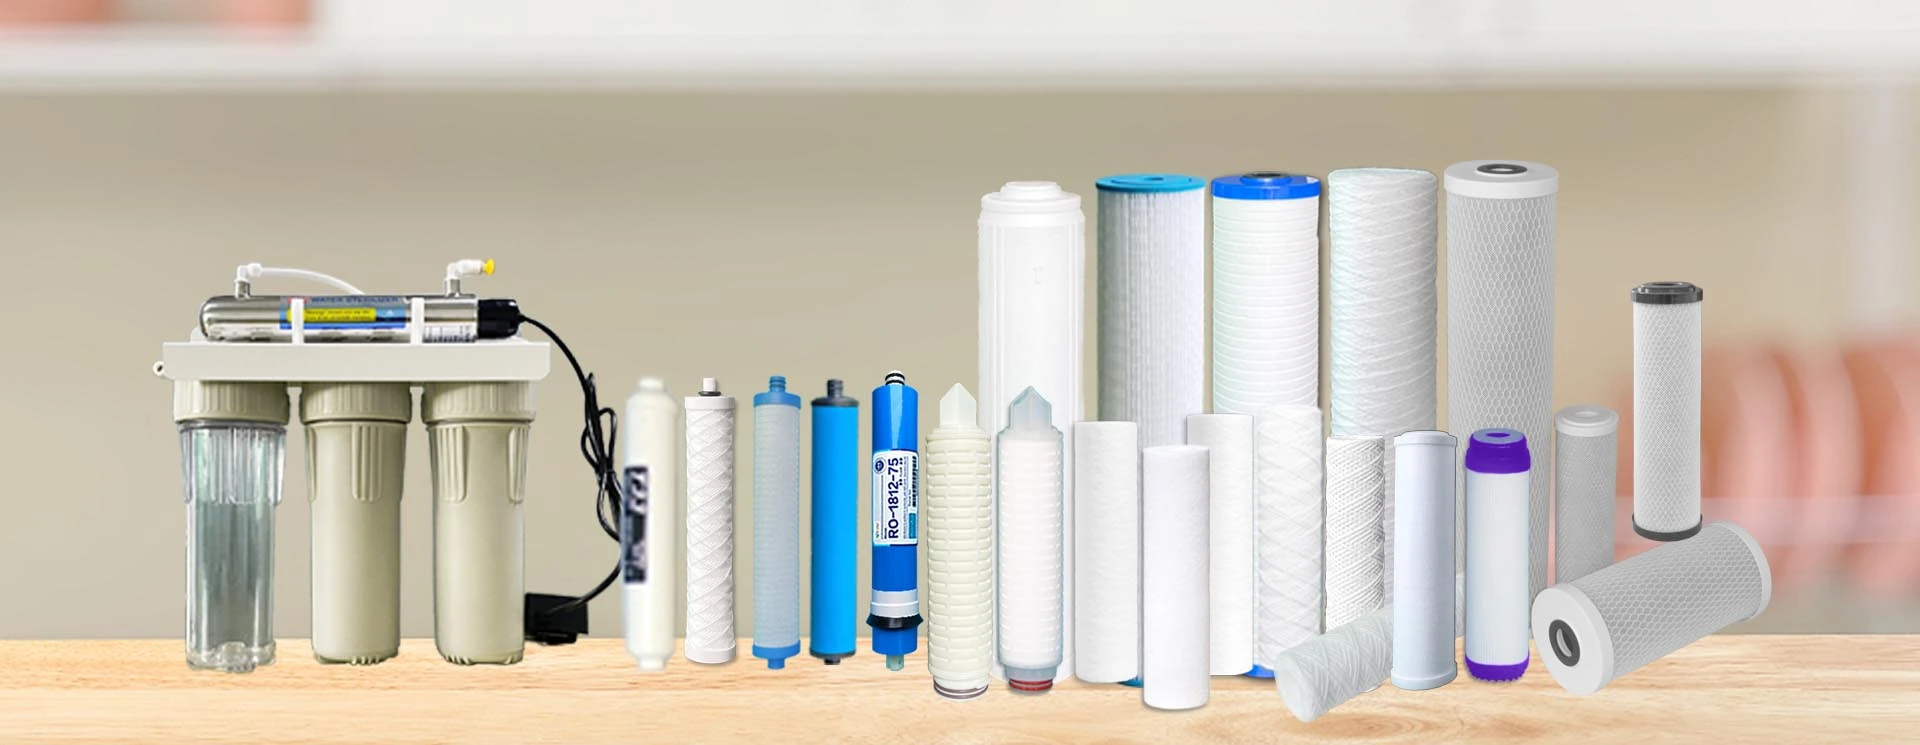 water filter cartridges and water filter system